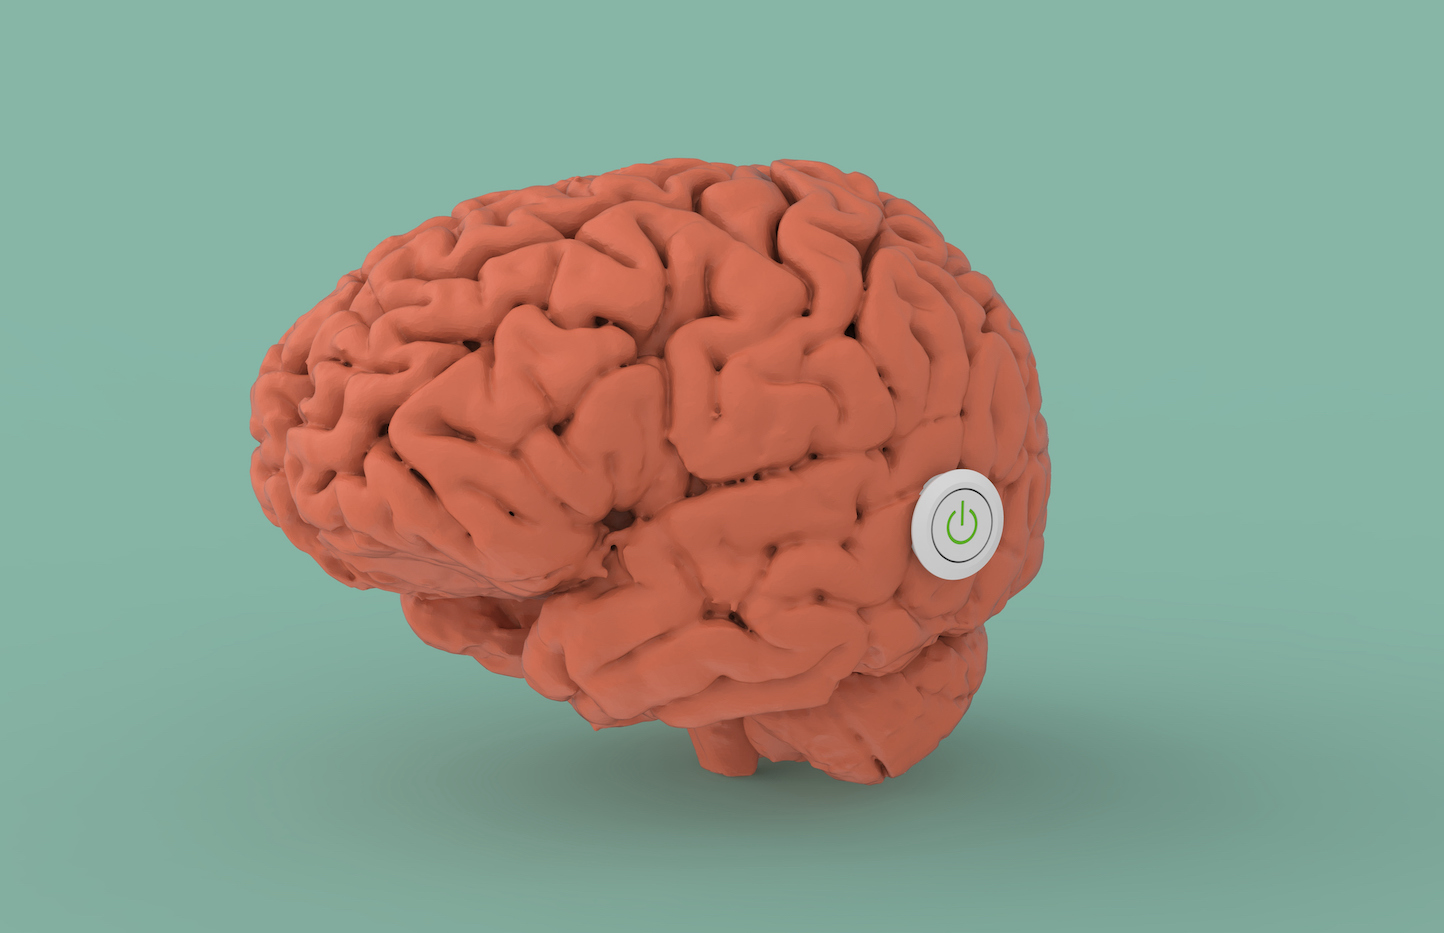 Brain concept with on/off button 3d rendering image